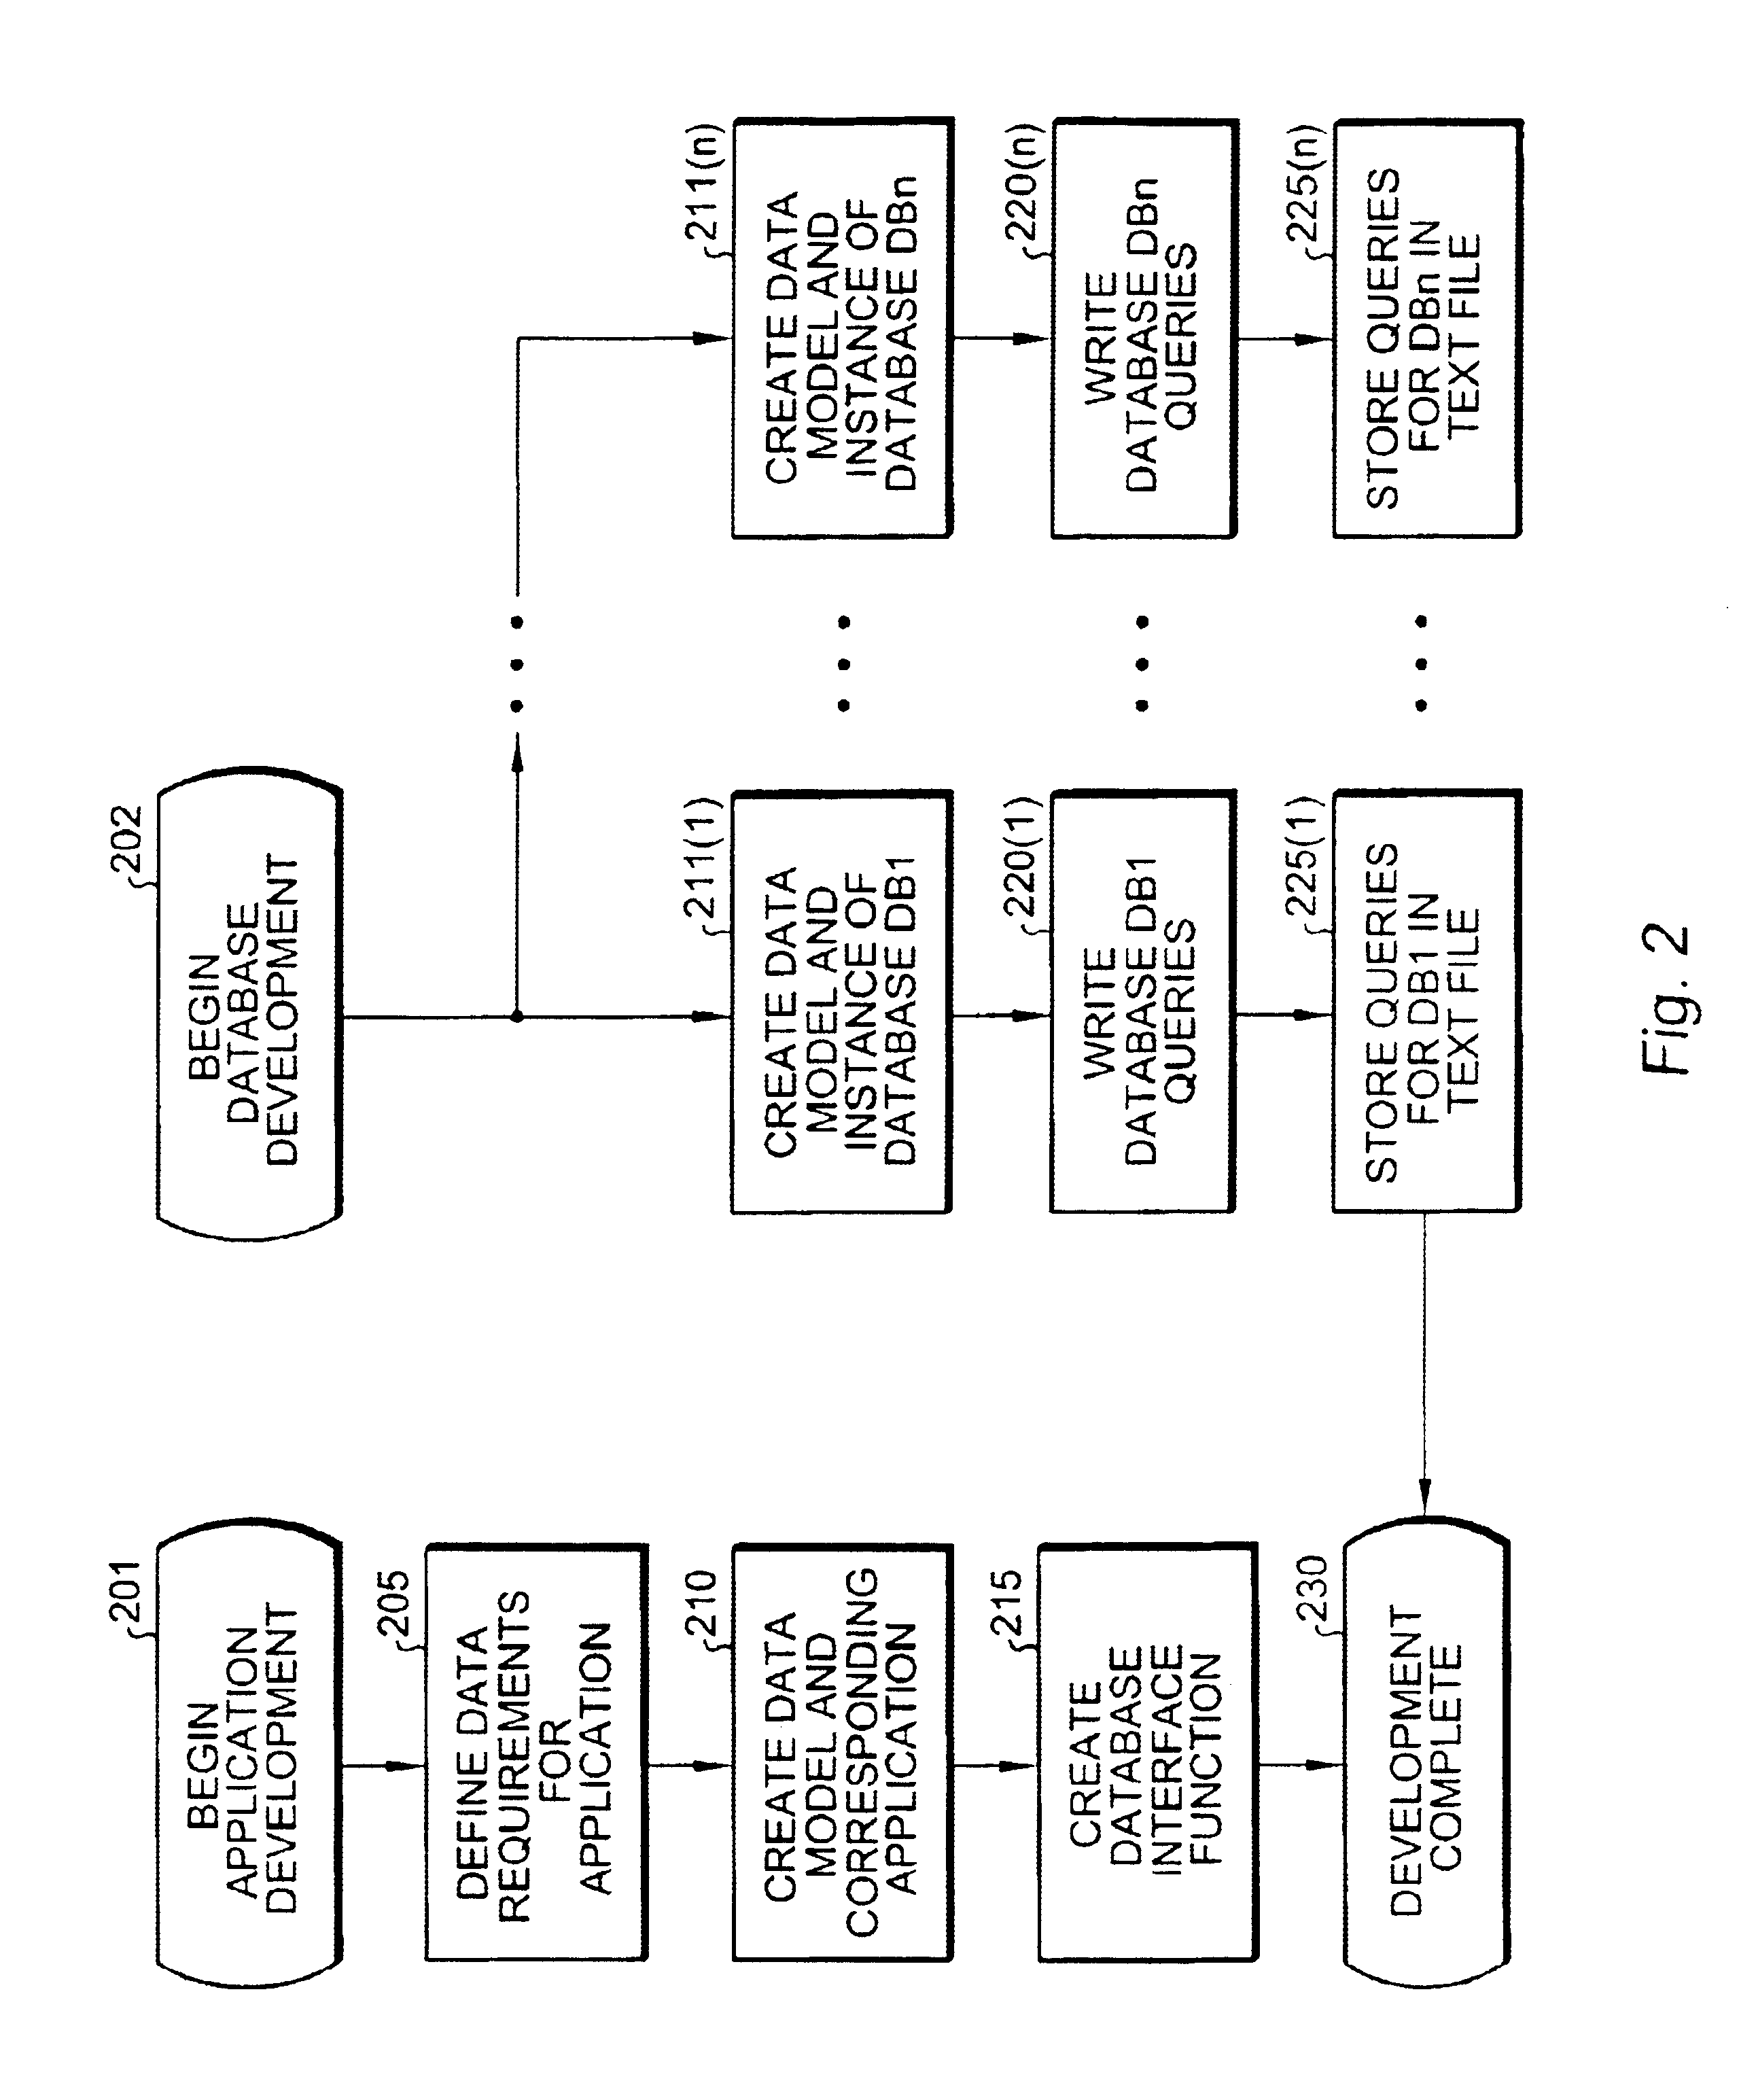 System for interfacing an application program with diverse databases